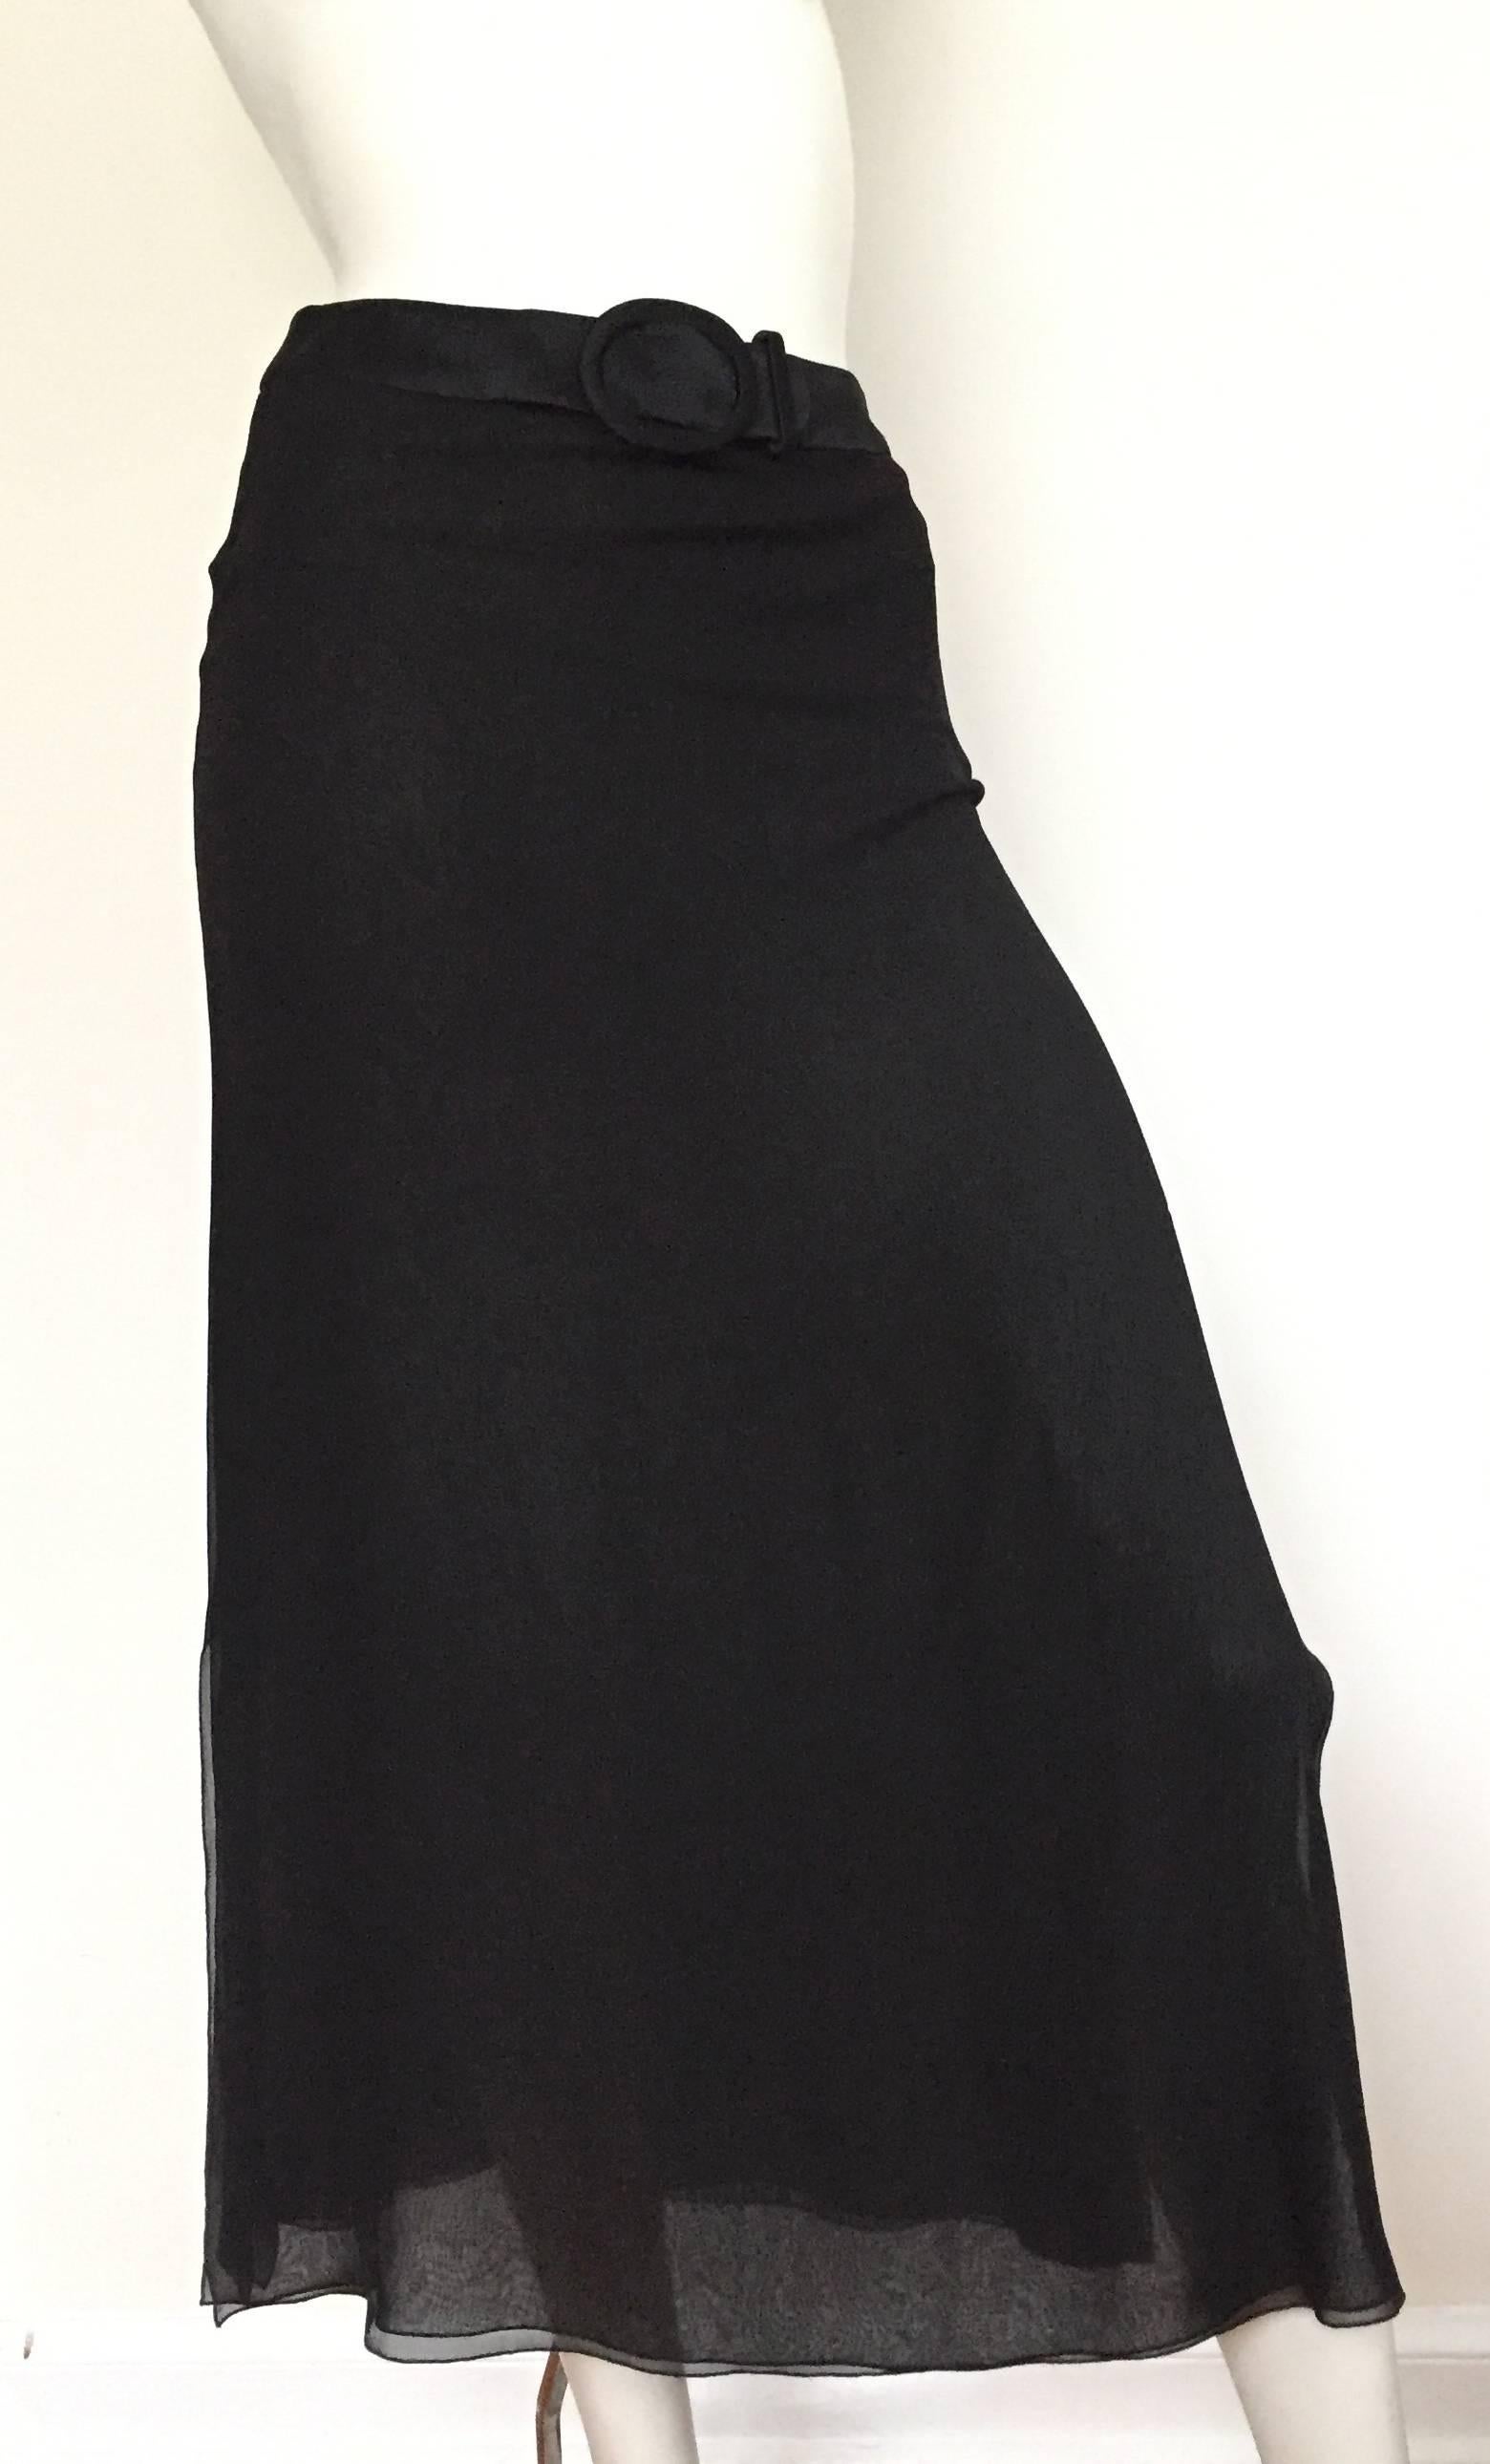 Valentino Boutique 1980s long black silk skirt size 6.  Please see & use measurements so that you can properly measure your lovely body. There are two flowing layers of silk with sexy slits on both sides of skirt. This is a stunning long elegant